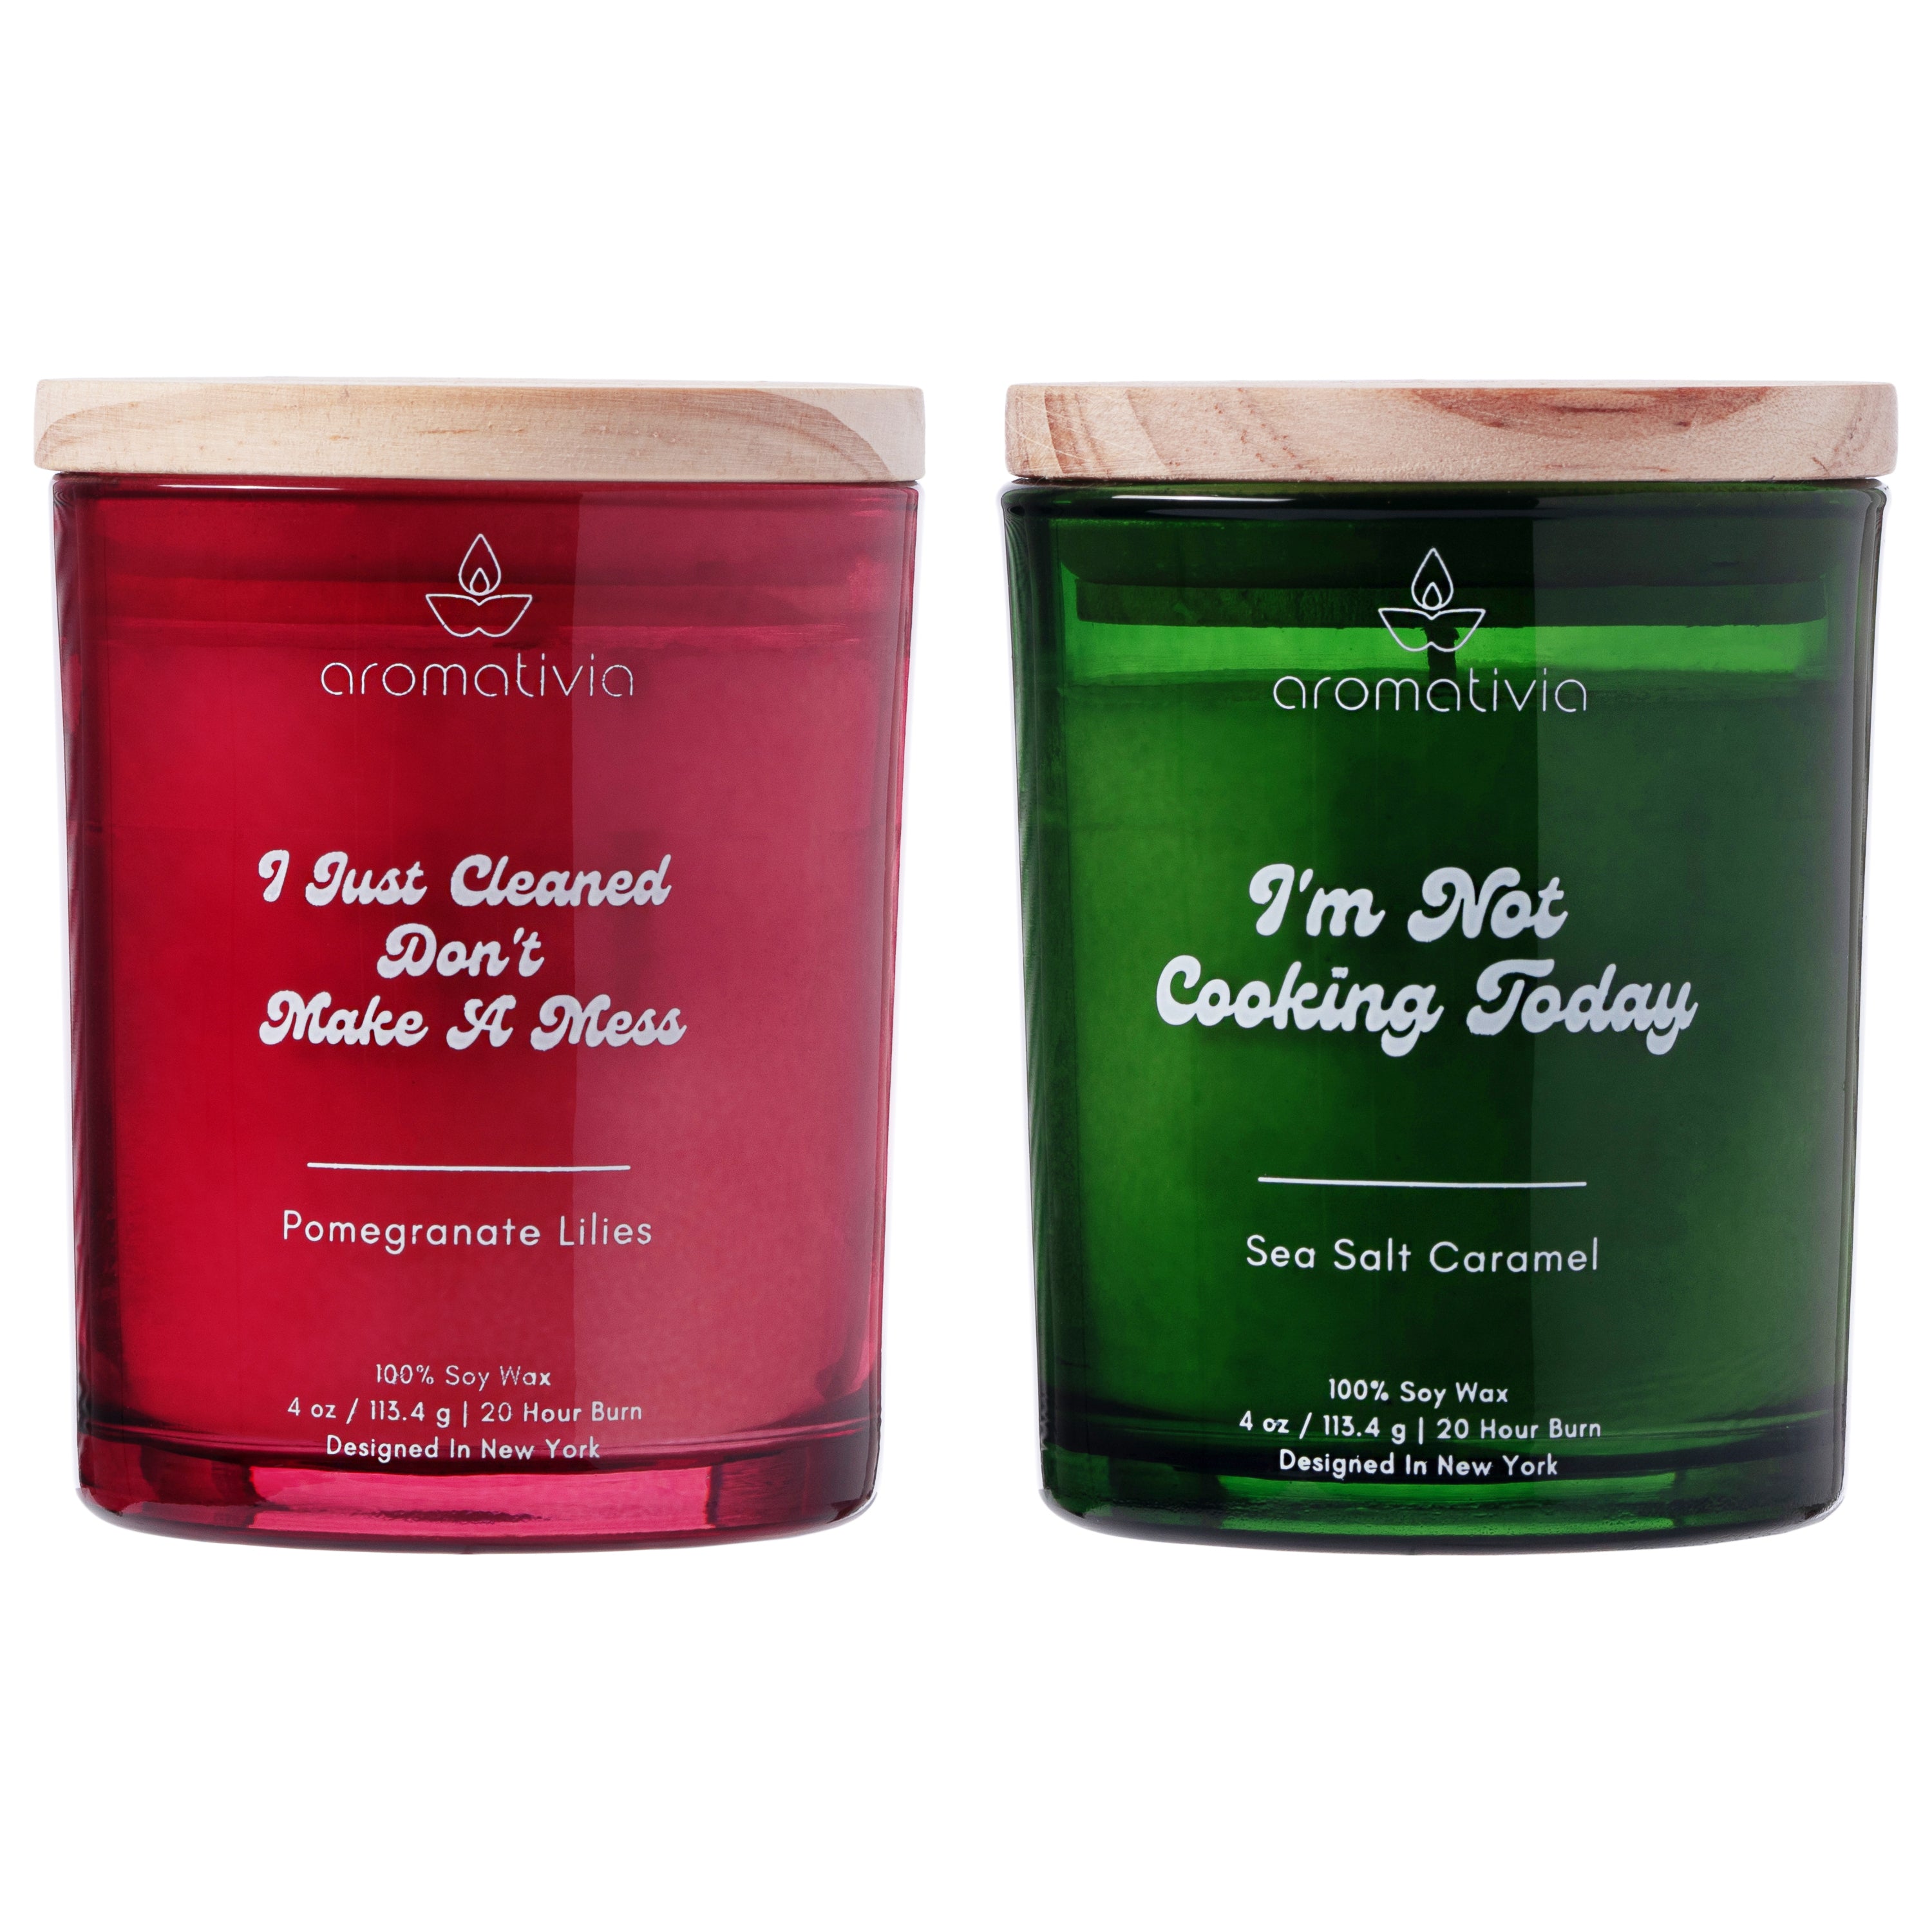 Funny Candles For Moms -The Moms Collection Gift Set Soy Scented Candles